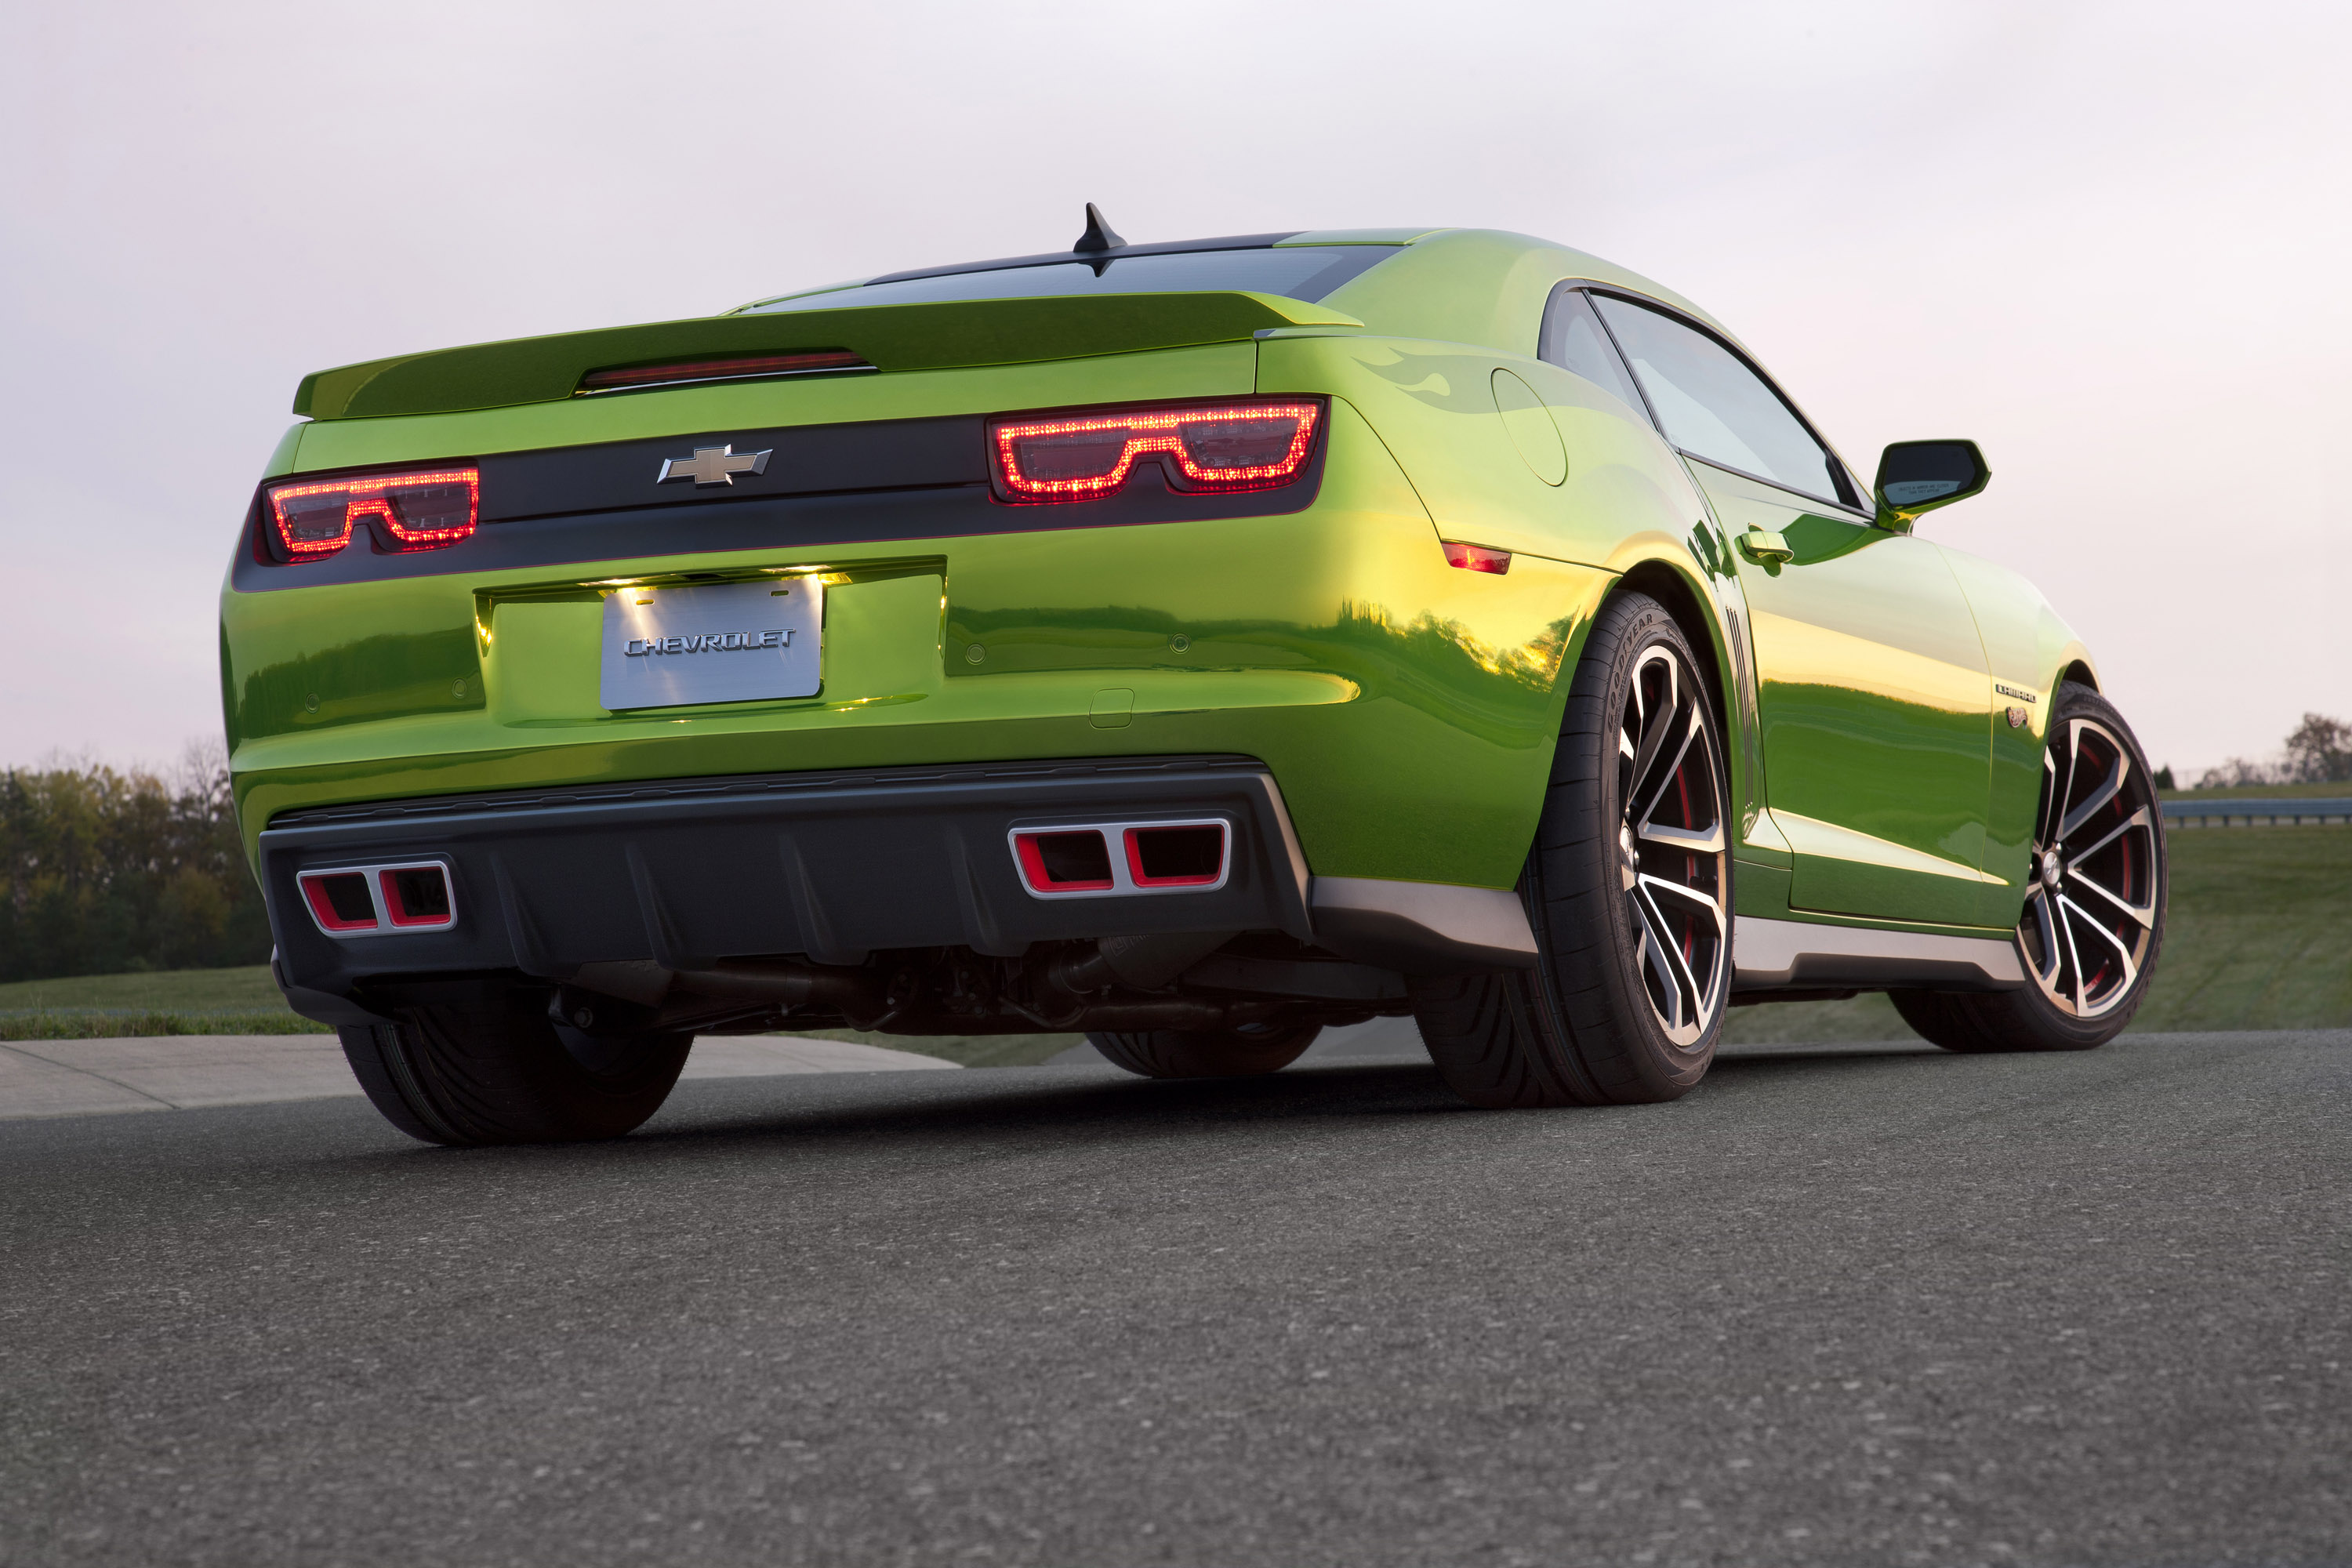 Chevrolet Camaro Hot Wheels Concept and Chevrolet Spark - a Green Discovery...